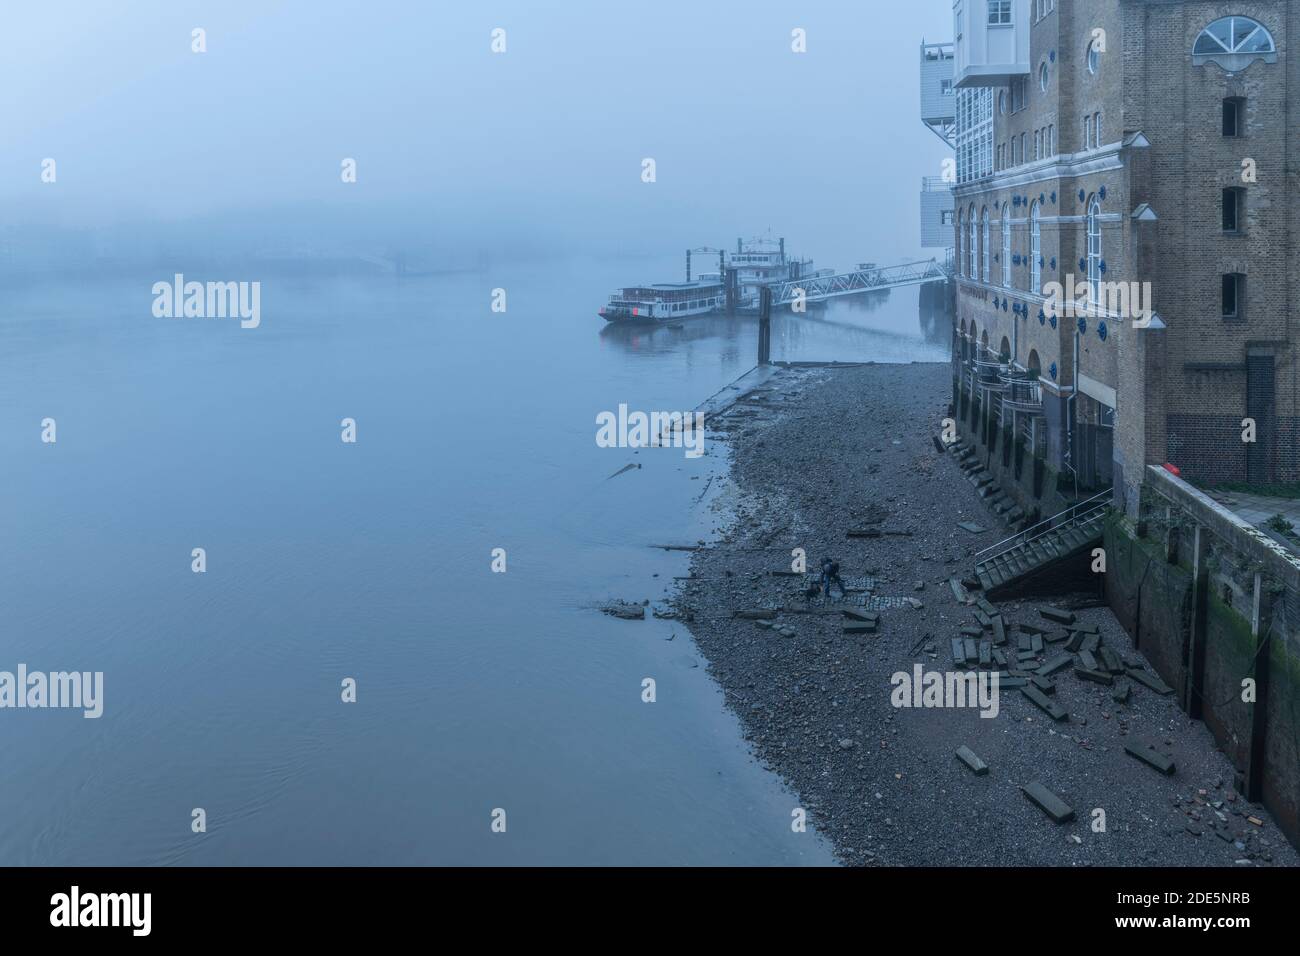 Butlers Wharf Pier at low tide with a River Thames beach in thick foggy and misty moody weather in London city centre during Covid-19 Coronavirus lockdown, England, UK Stock Photo